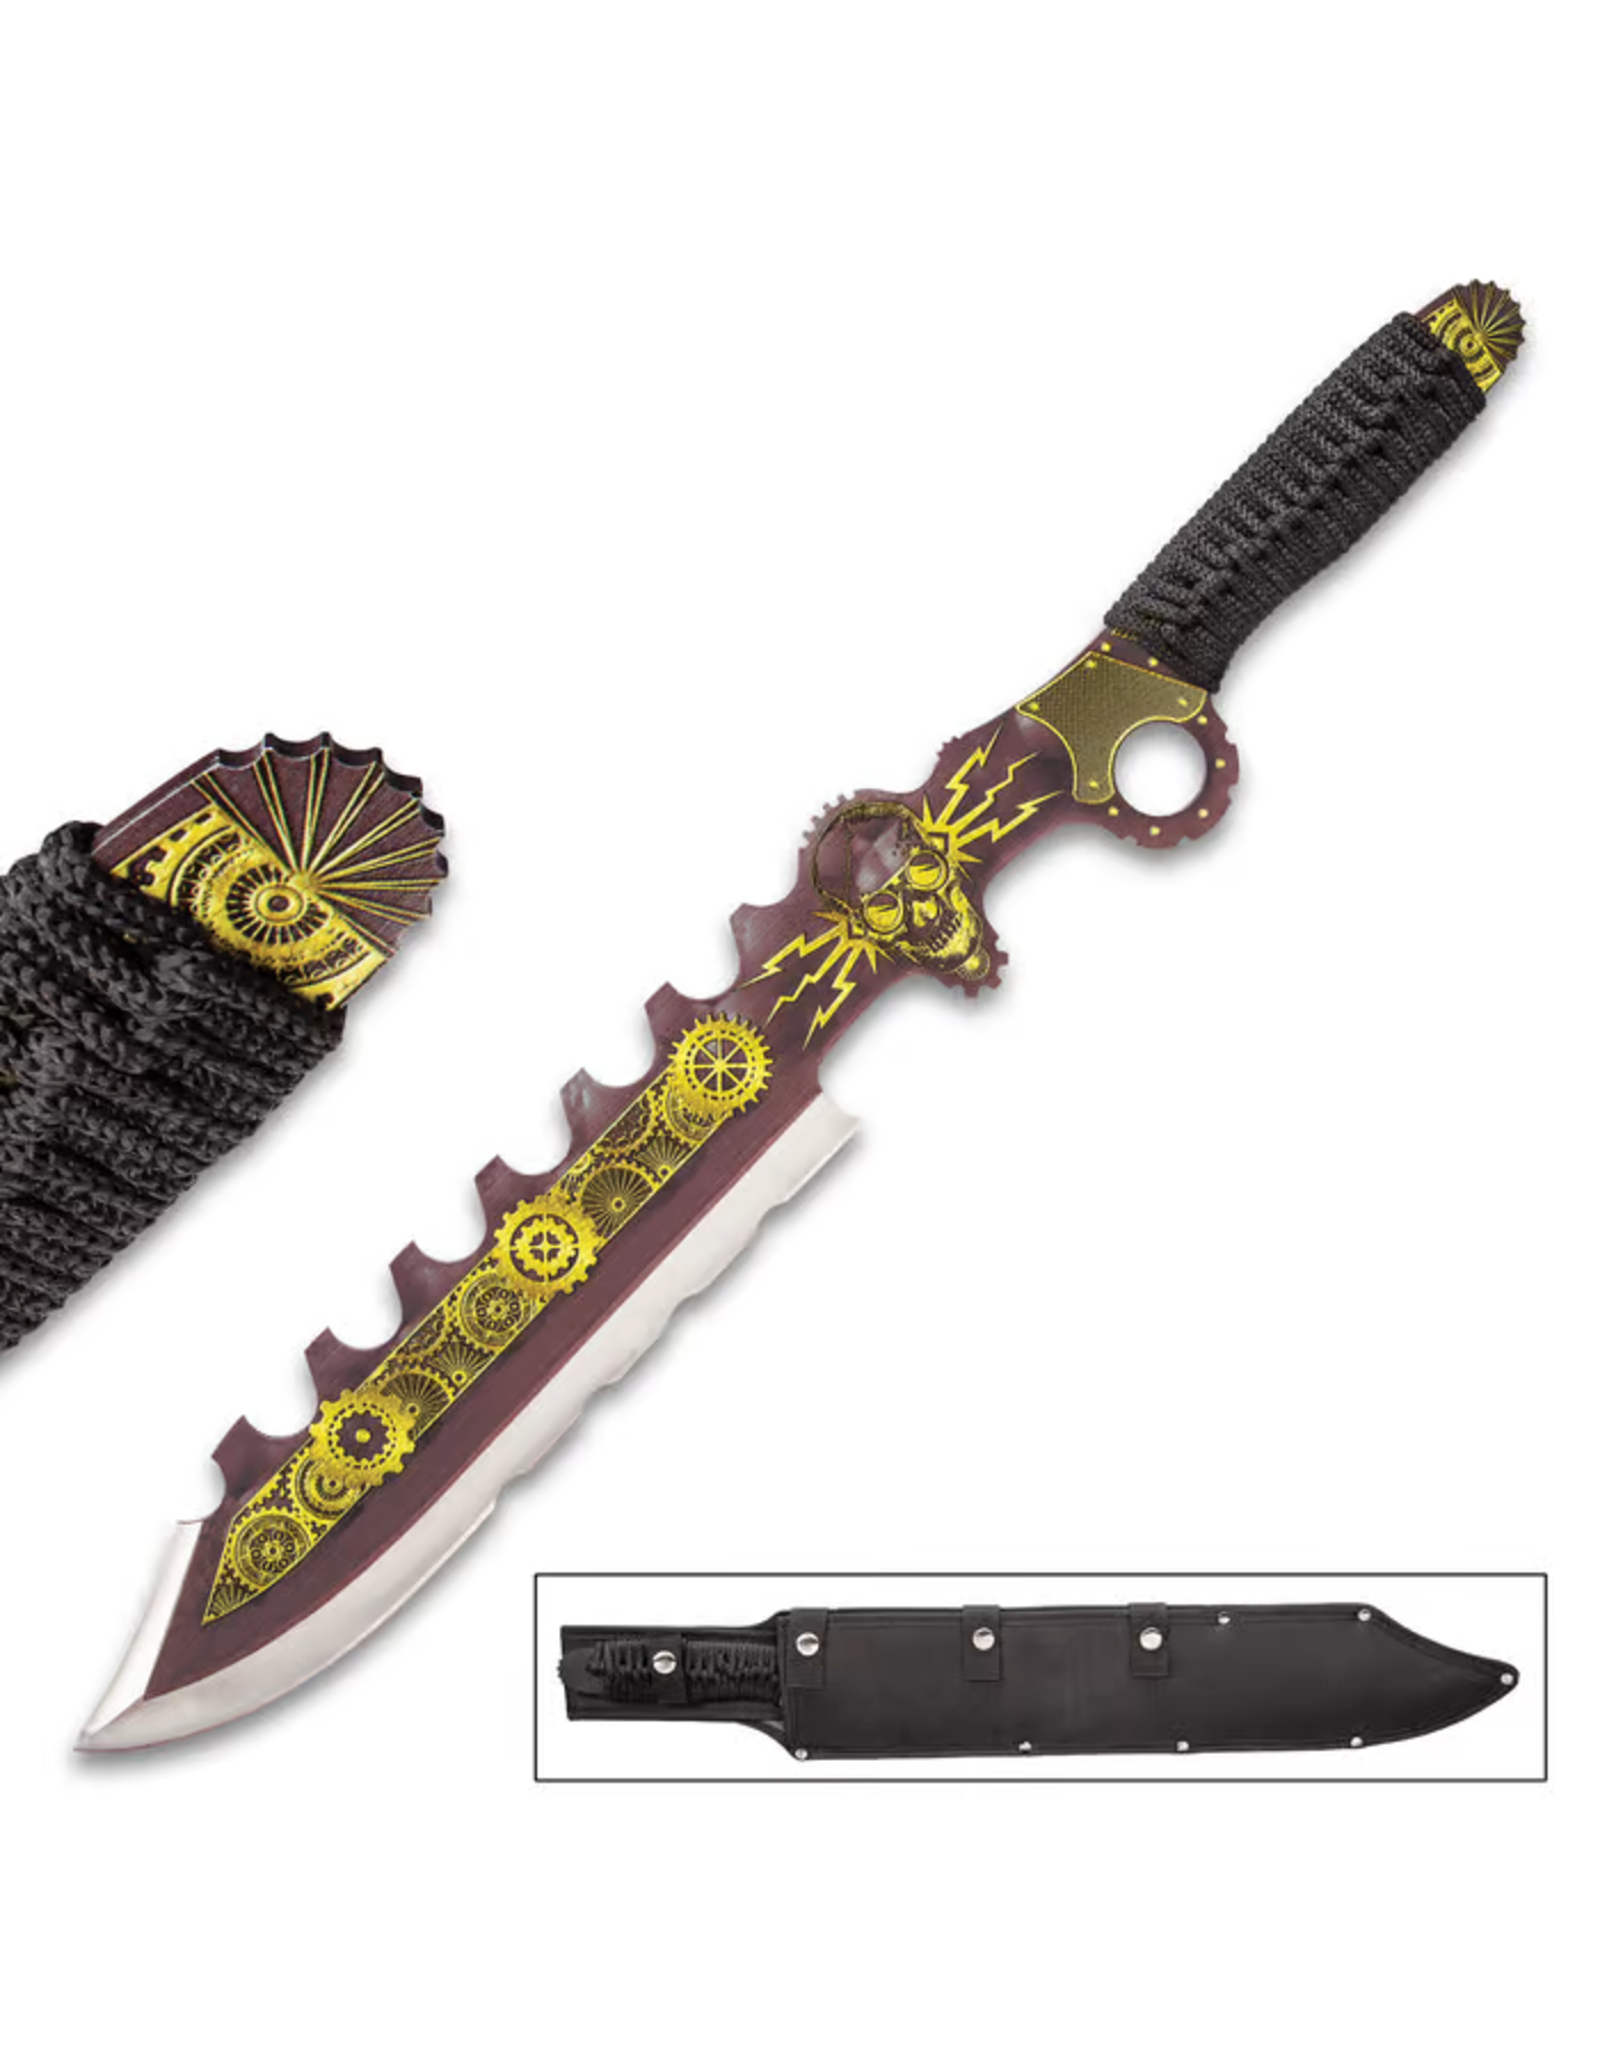 Black Legion Black Legion Aether Master Steamer Sword With Sheath - Stainless Steel Construction, Non-Reflective Coating, Raised Design - Length 24”